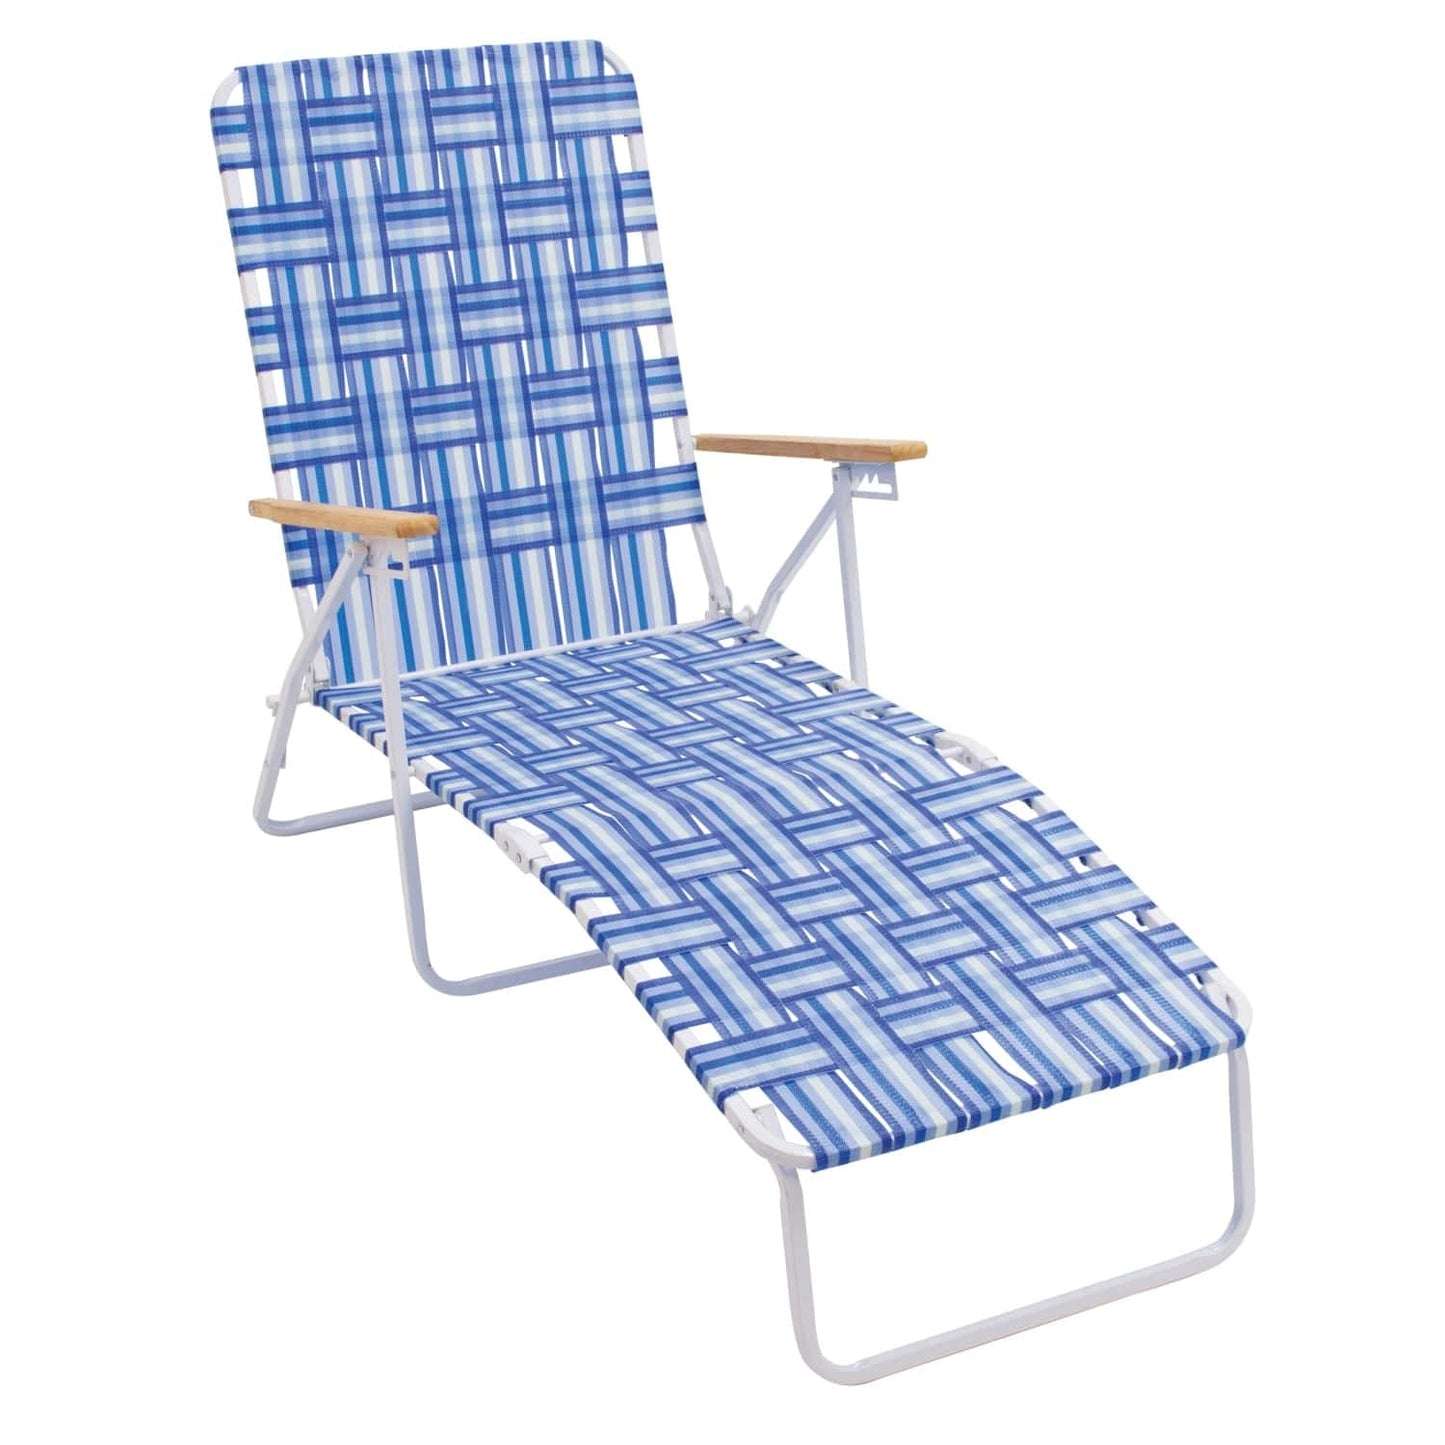 RIO Outdoor Lounger RIO Beach | Steel Web Chaise Lounge - Blue White BY405-0128-1